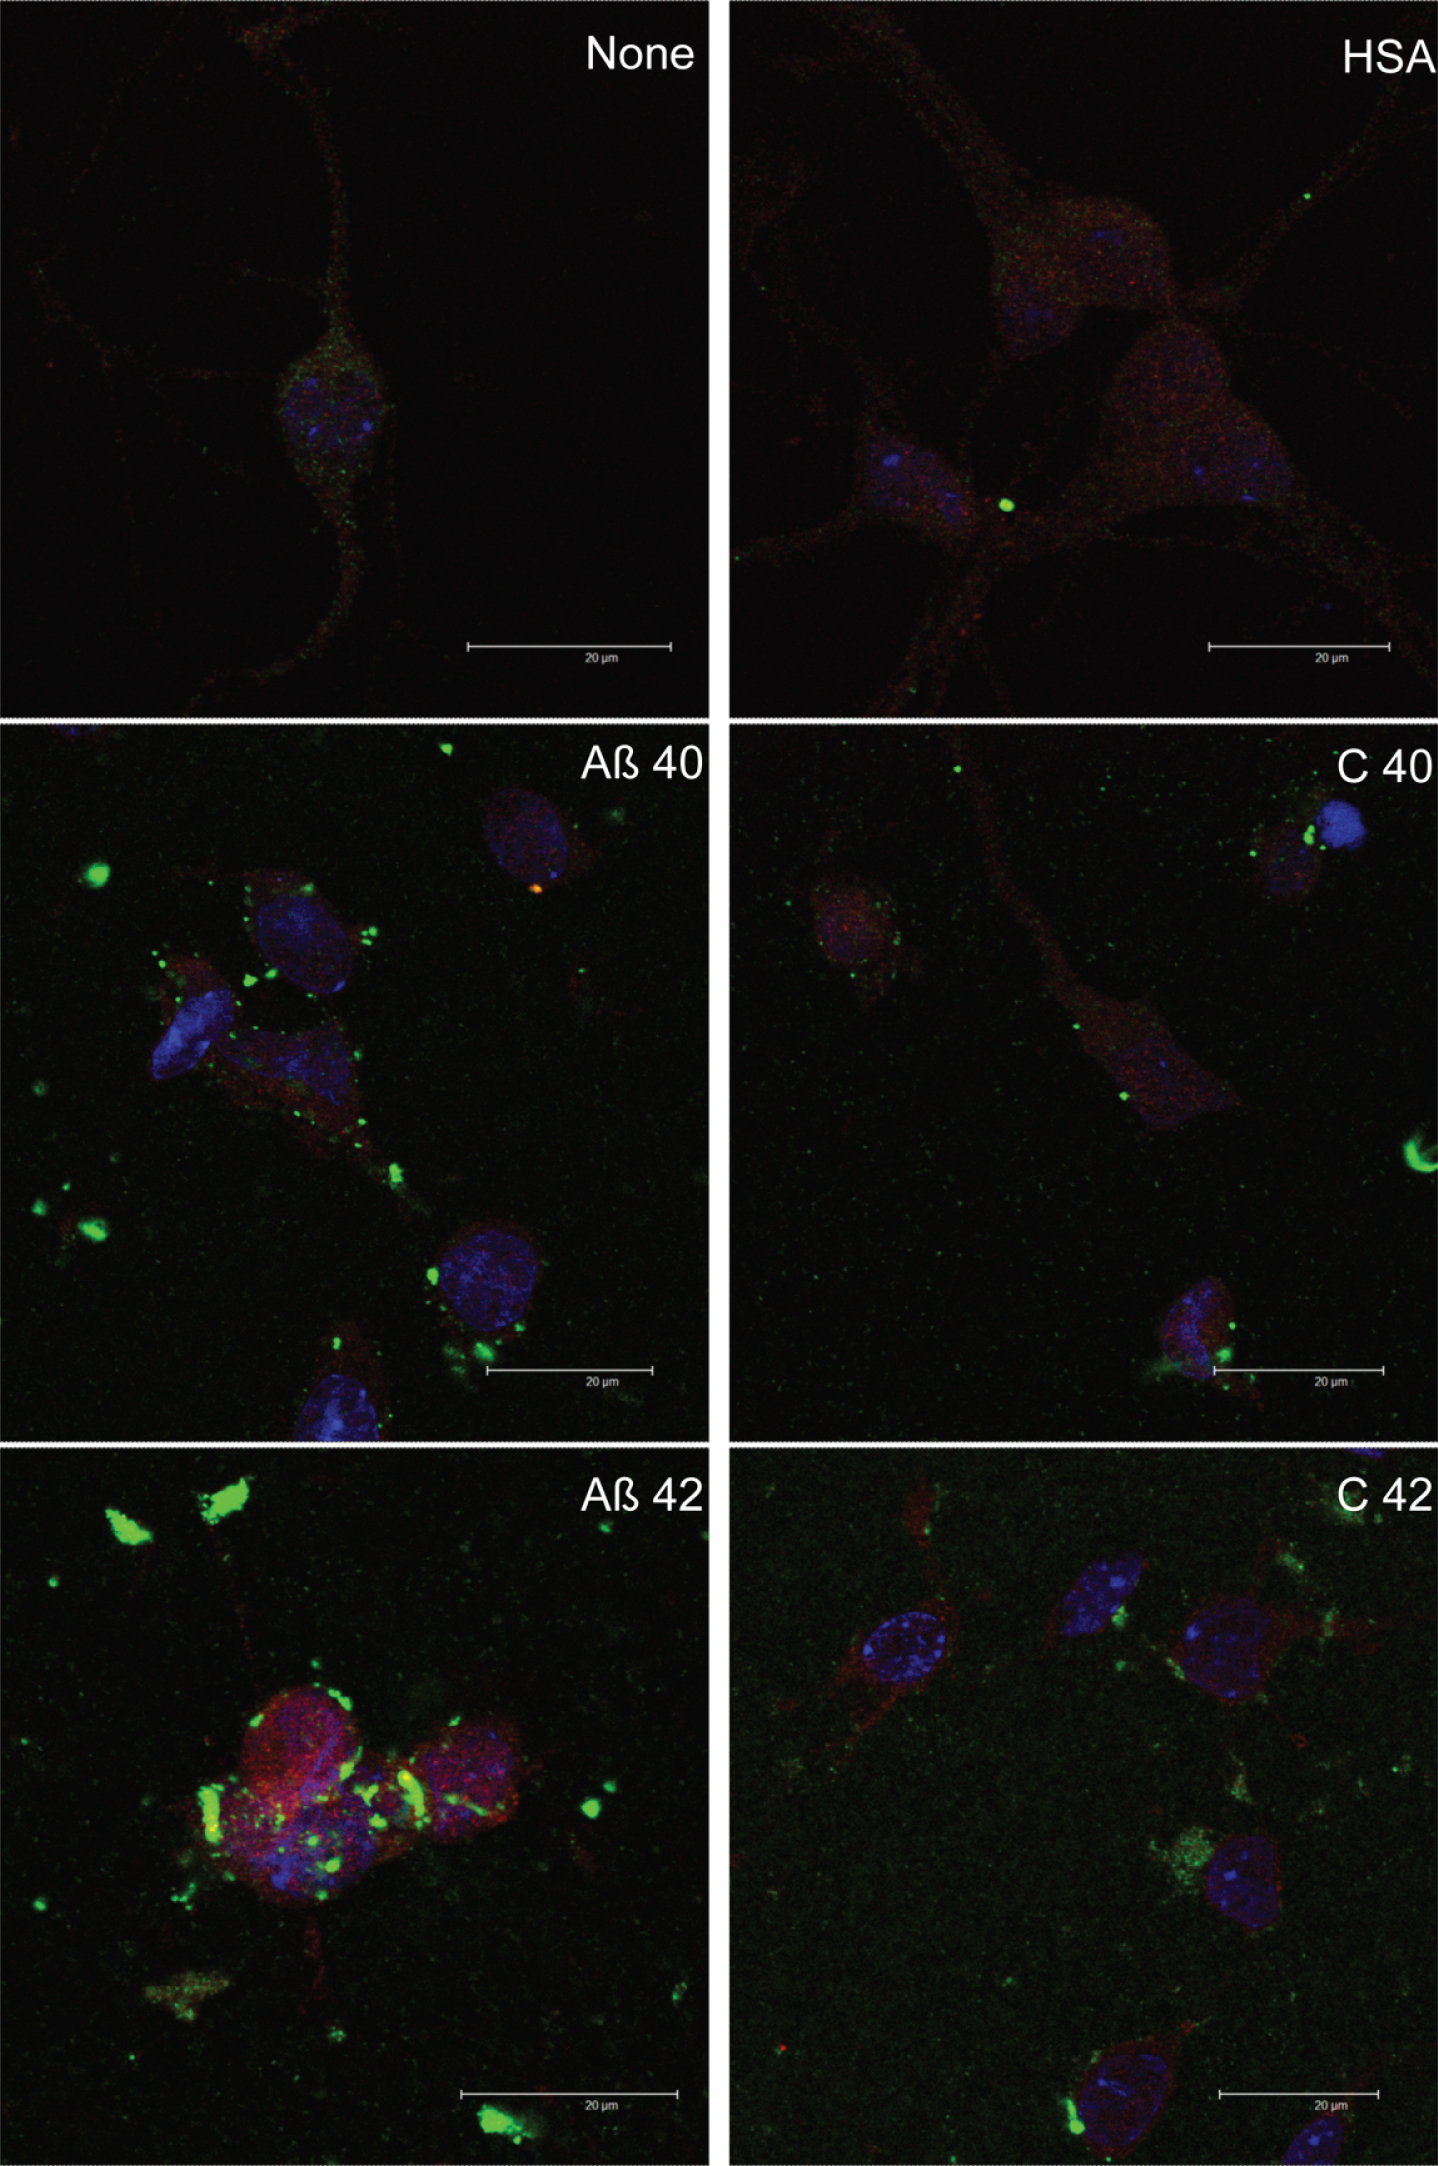 Effect of HSA on amyloid-beta cell entry. Neurons in primary culture (3 DIV) were incubated for 2 h in Hanks medium in the presence of 30 μM of Aβ40, Aβ42, or HSA-Aβ complexes (C40, C42). After incubation, cells were fixed and immunocytochemistry against glucose transporter 3 (in red) and against AβPP (in green) was carried out. Nuclei were stained with TOPRO (in blue). Images were taken using confocal microscopy. Scale bar: 20 μm.